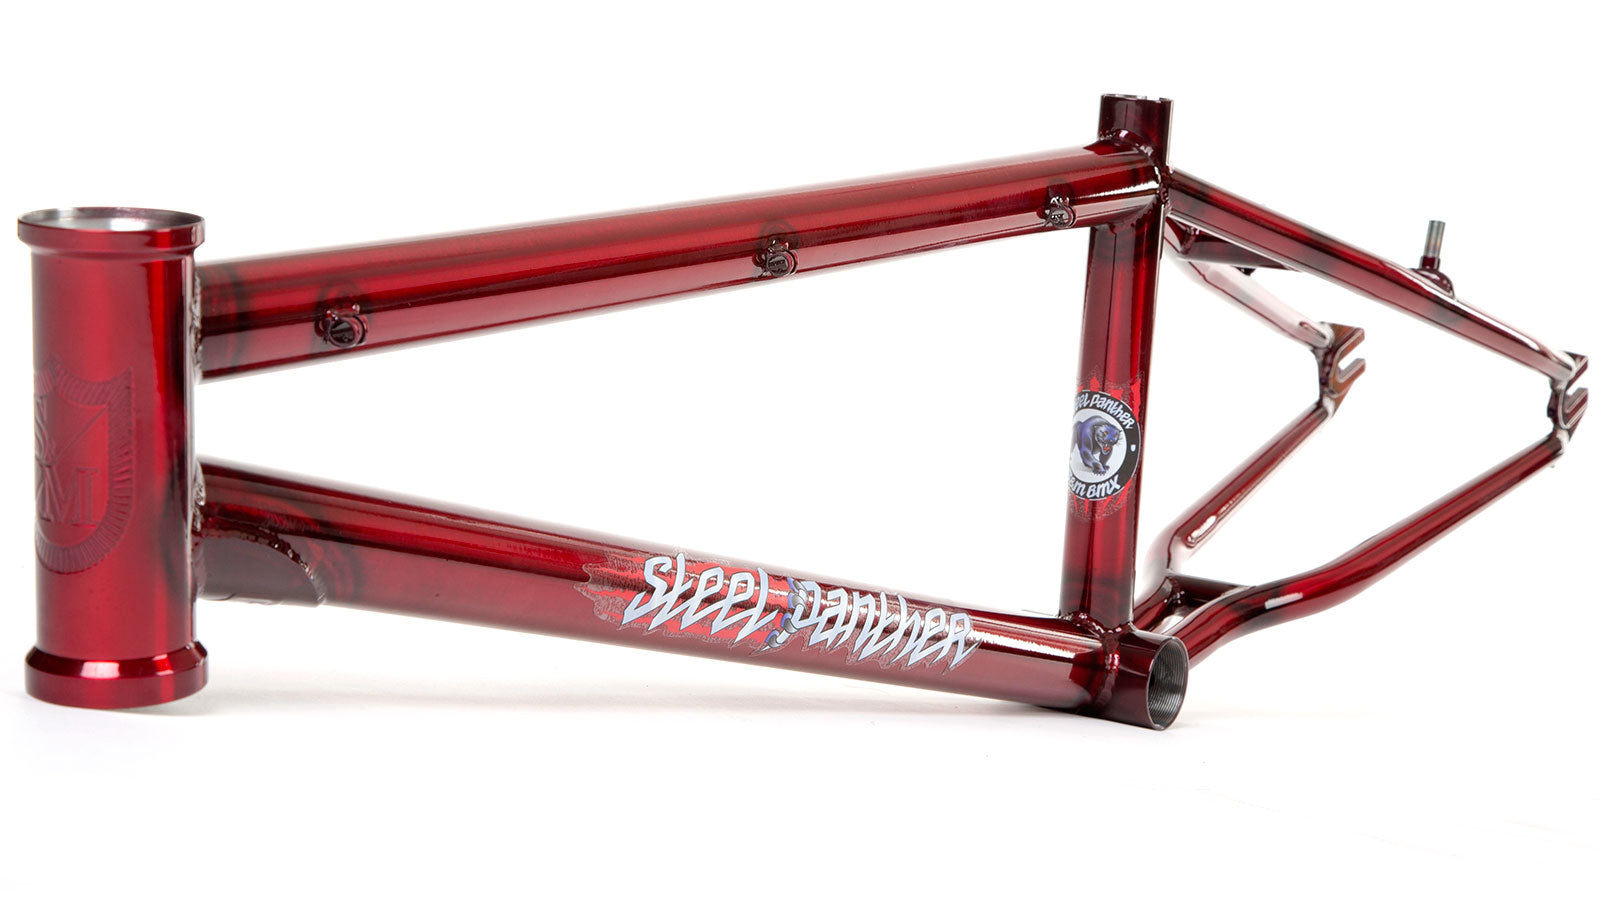 STEEL PANTHER FRAME 22" TRANS RED